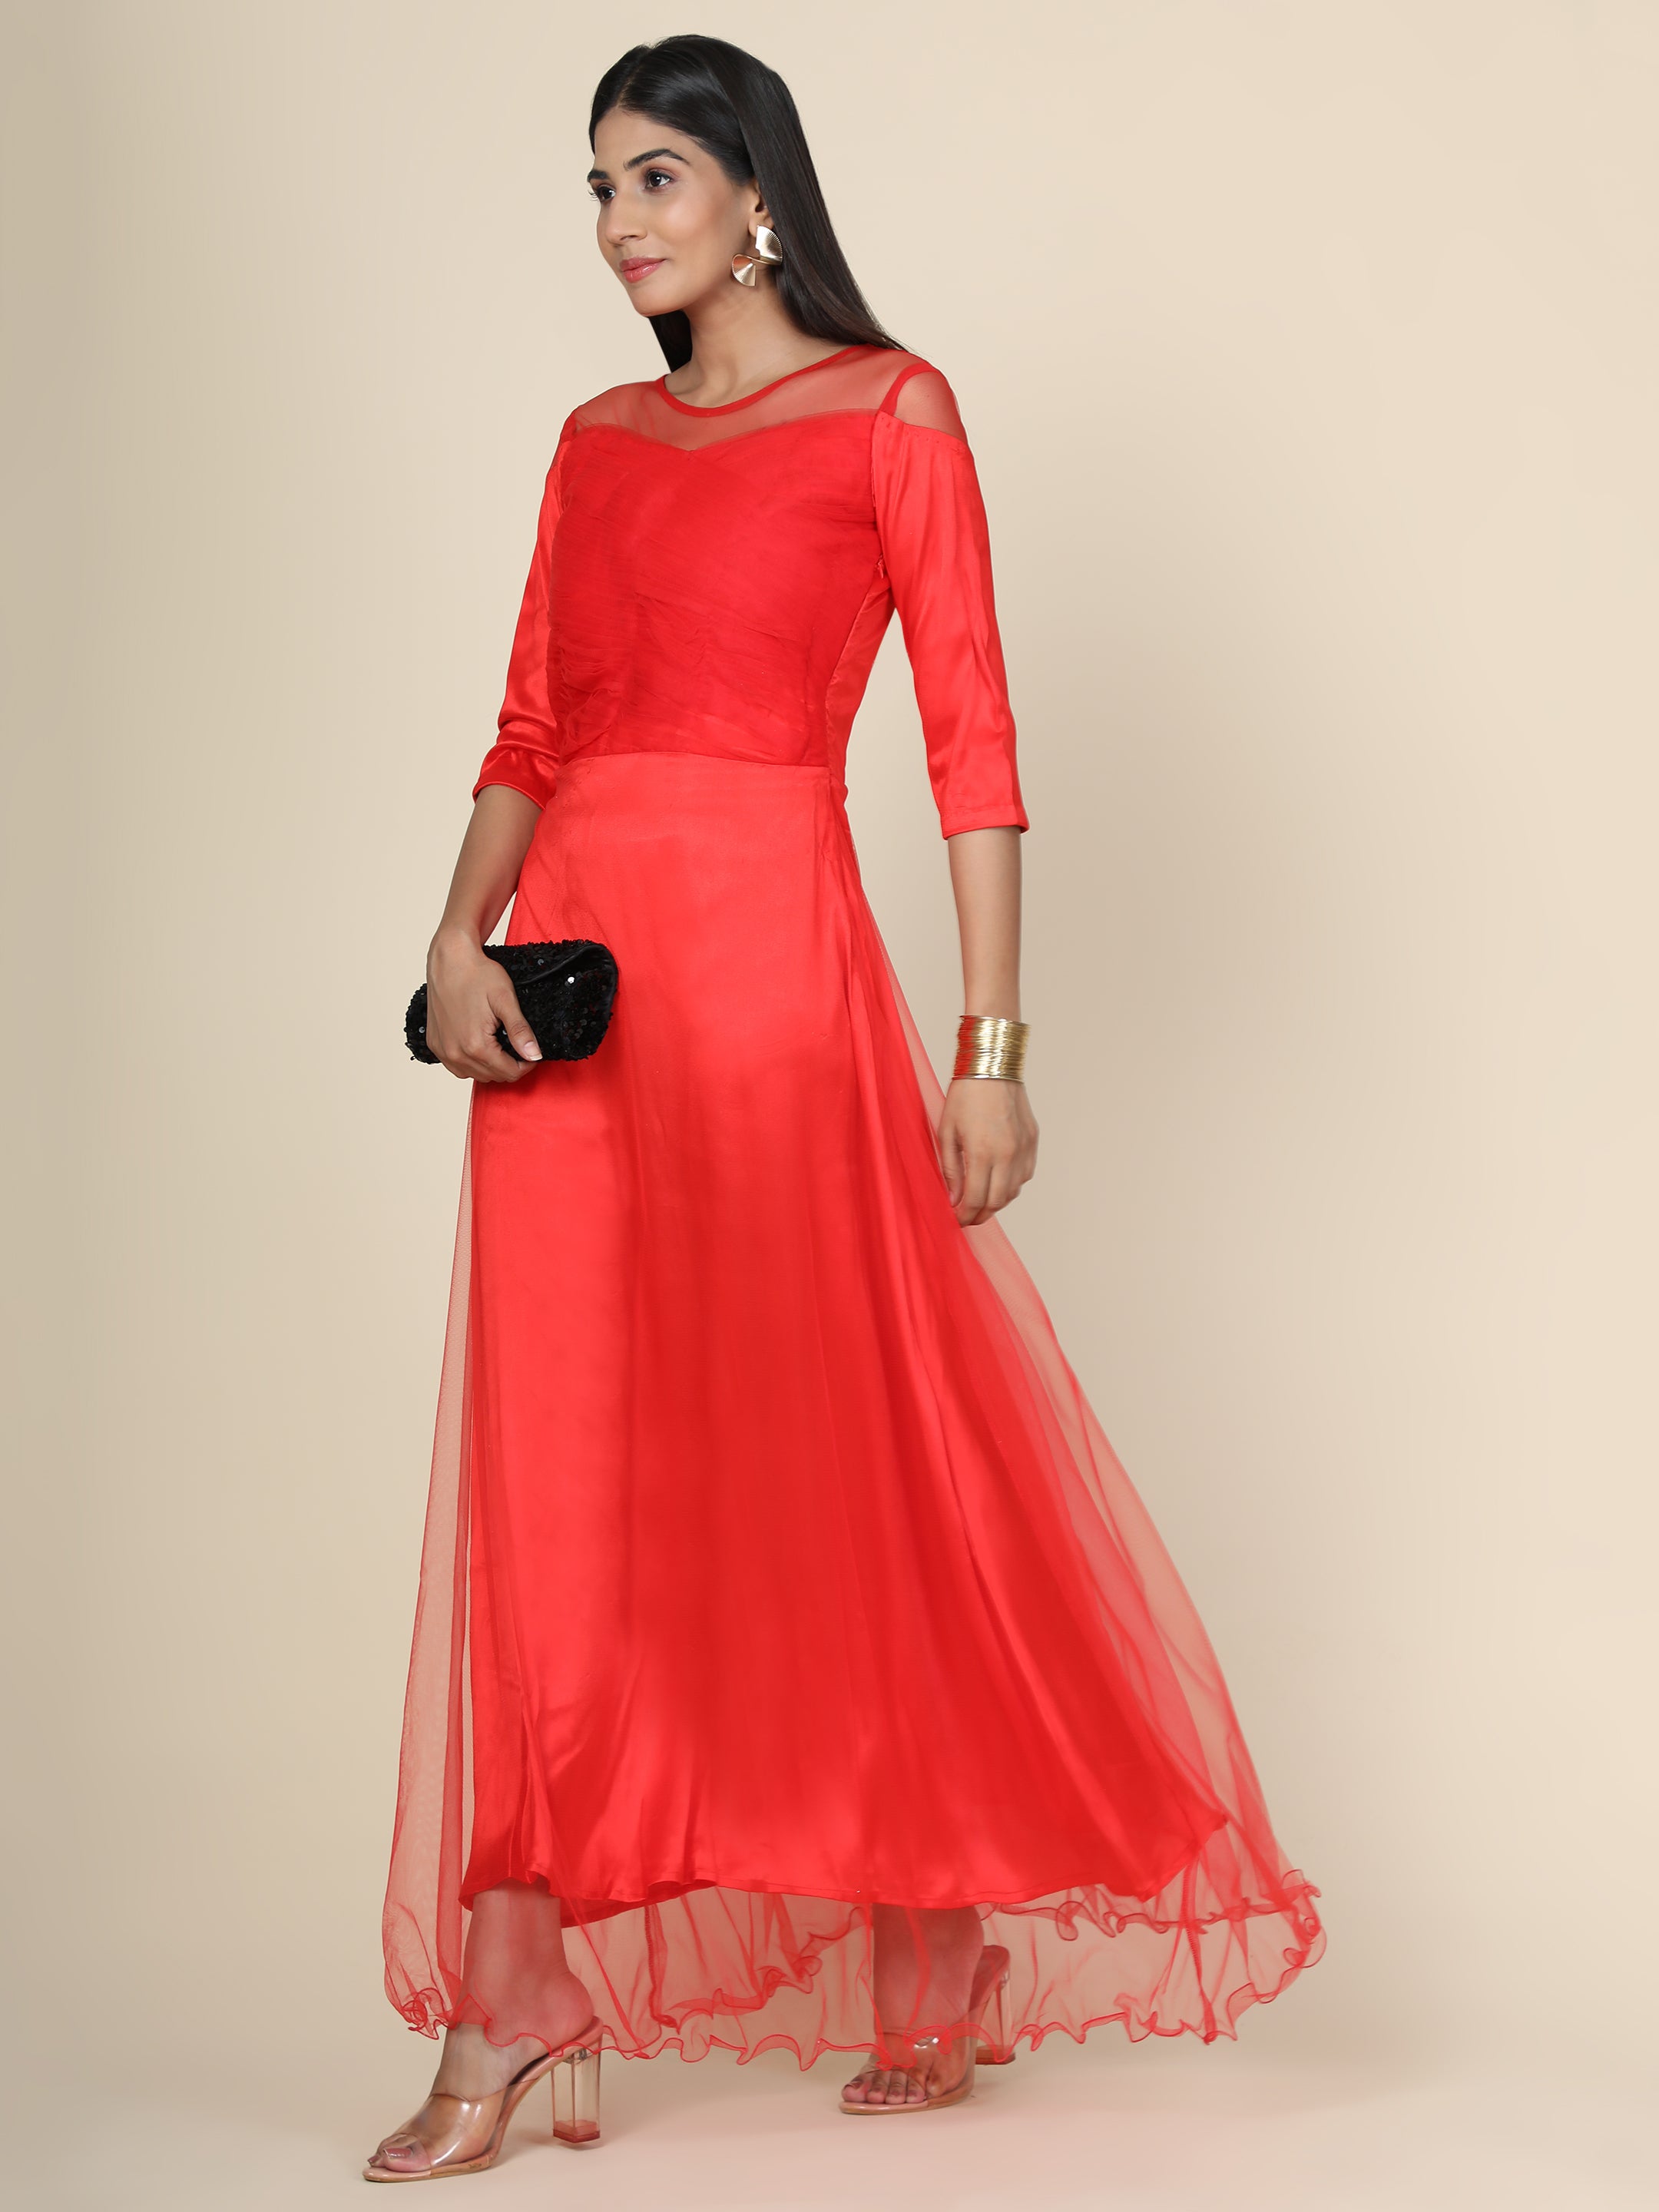 Women's Pleat Draped Red Gown - MIRACOLOS by Ruchi